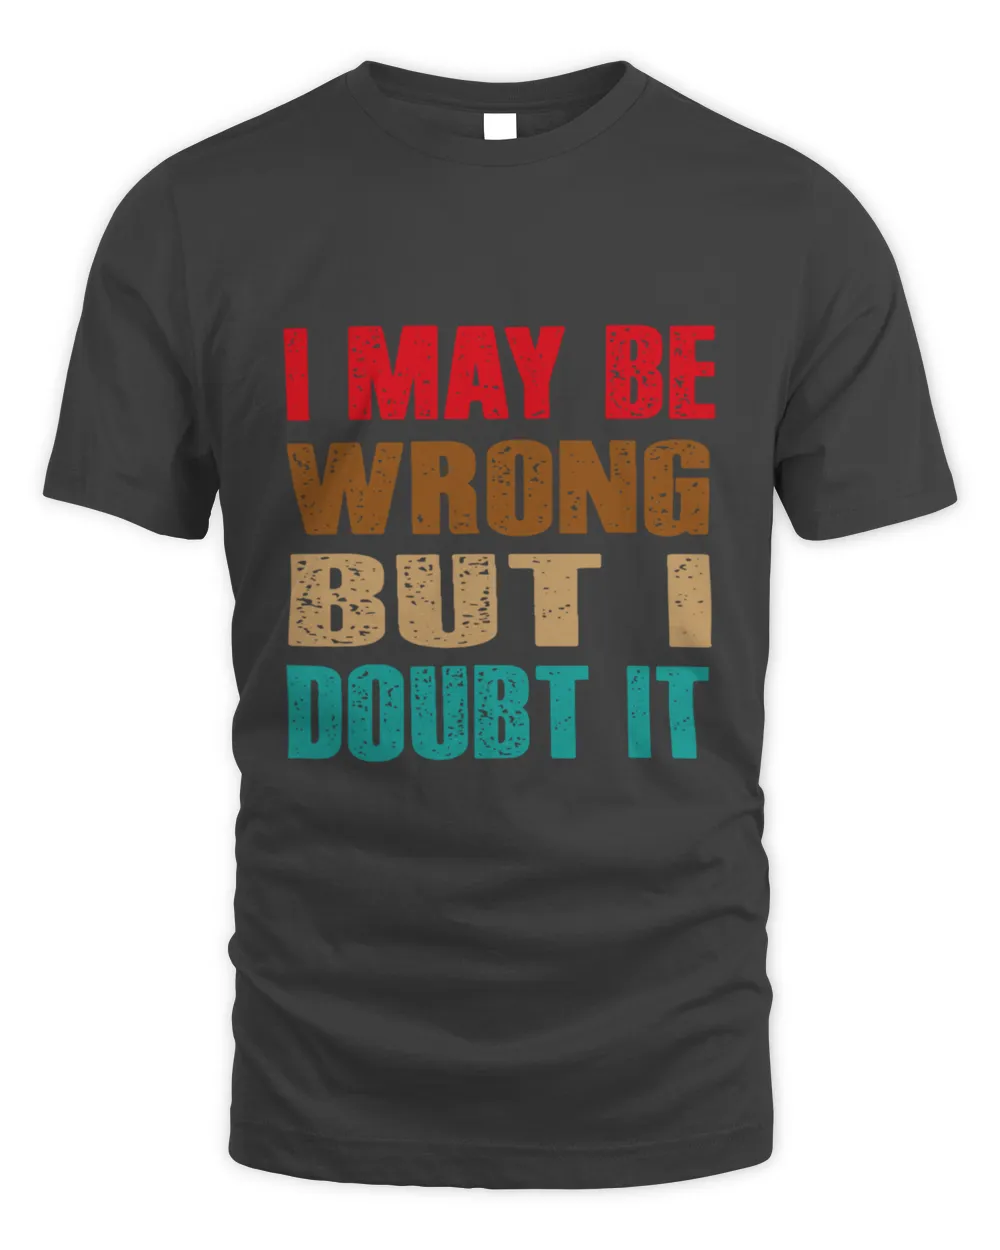 New Funny Quote I May Be Wrong But I Doubt It Always Right Saying6348 T-Shirt